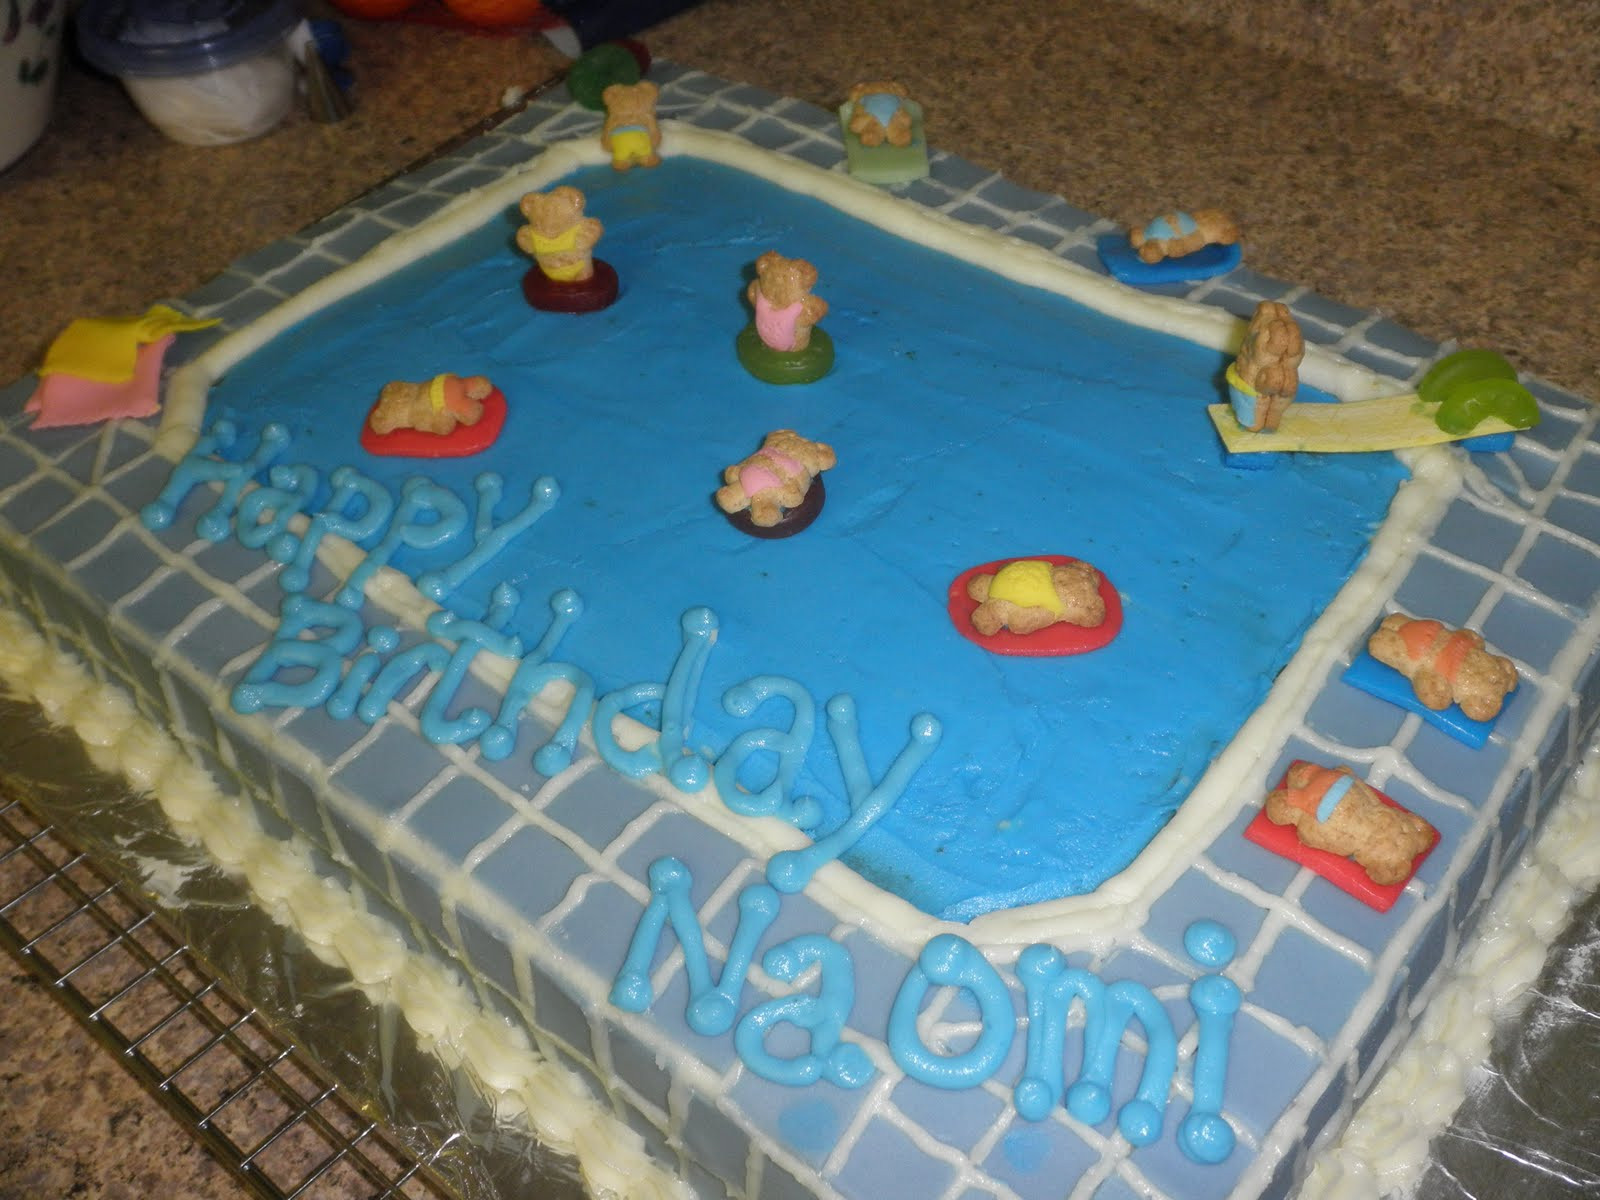 Pool Party Cake Ideas
 Cakes By D Pool Party Birthday Cake